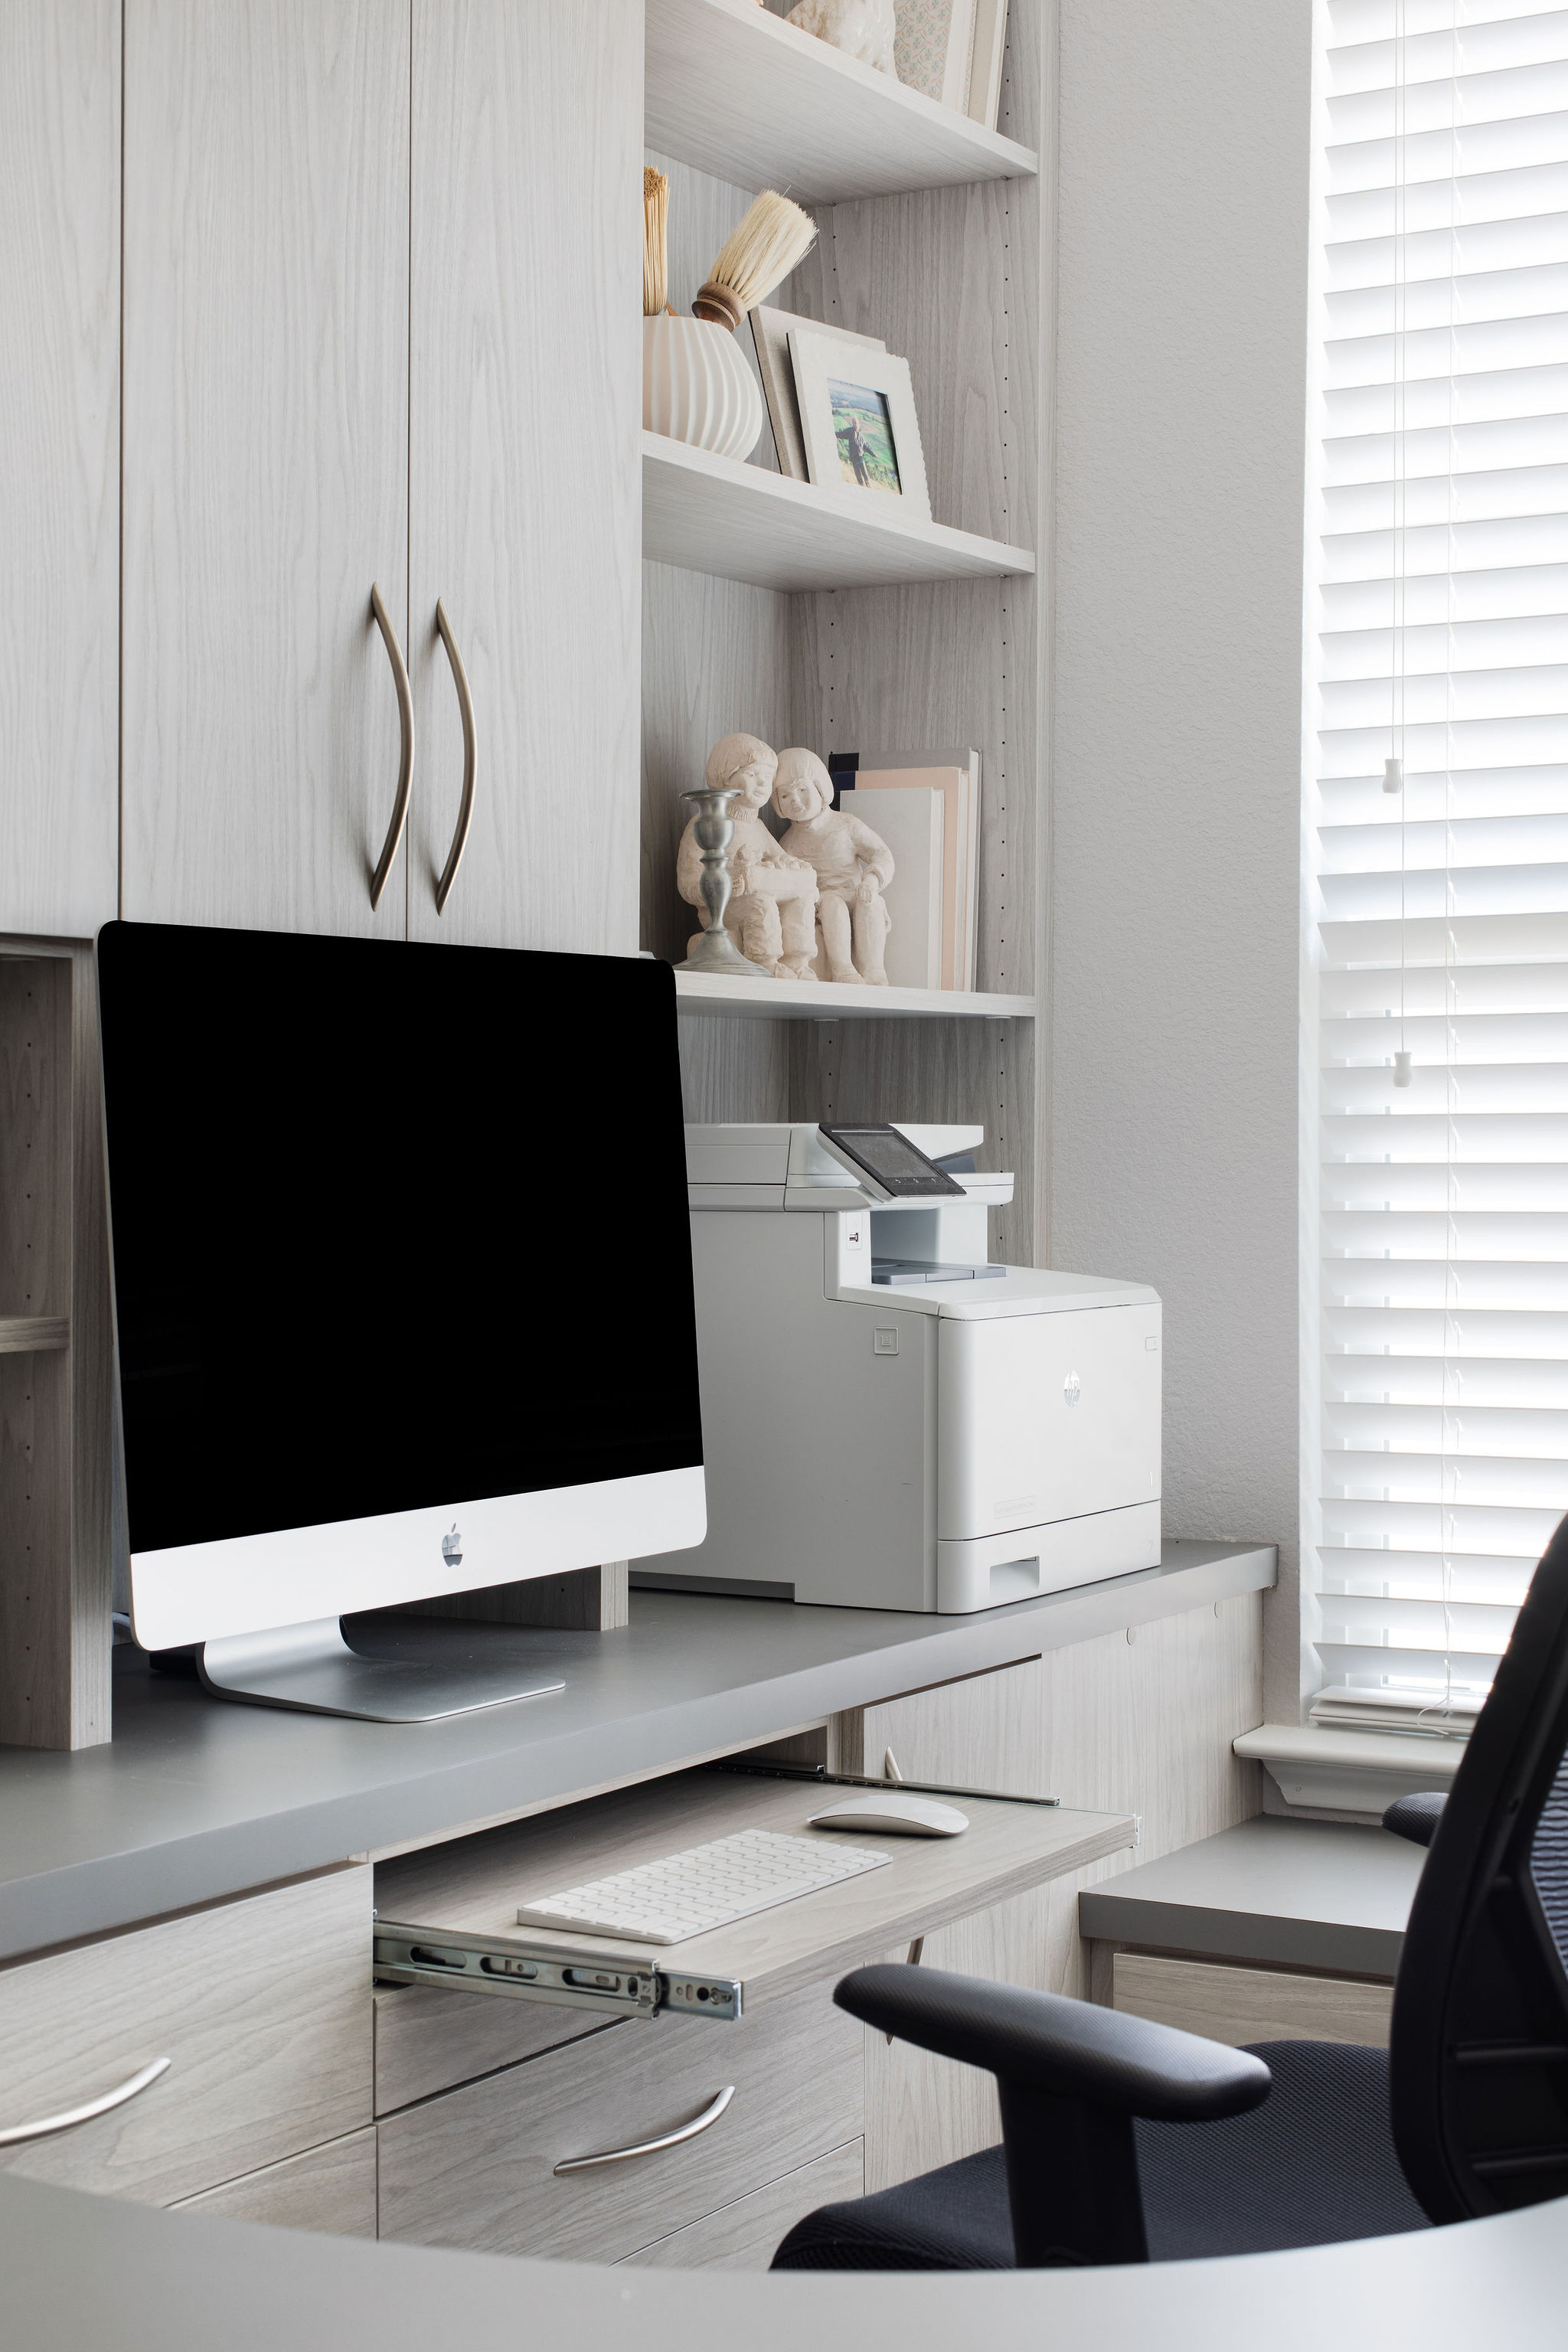 Maximize space with our Home Office. Work from home effortlessly, combining functionality and style. Discover versatile solutions for small spaces. Consider a home office design today!